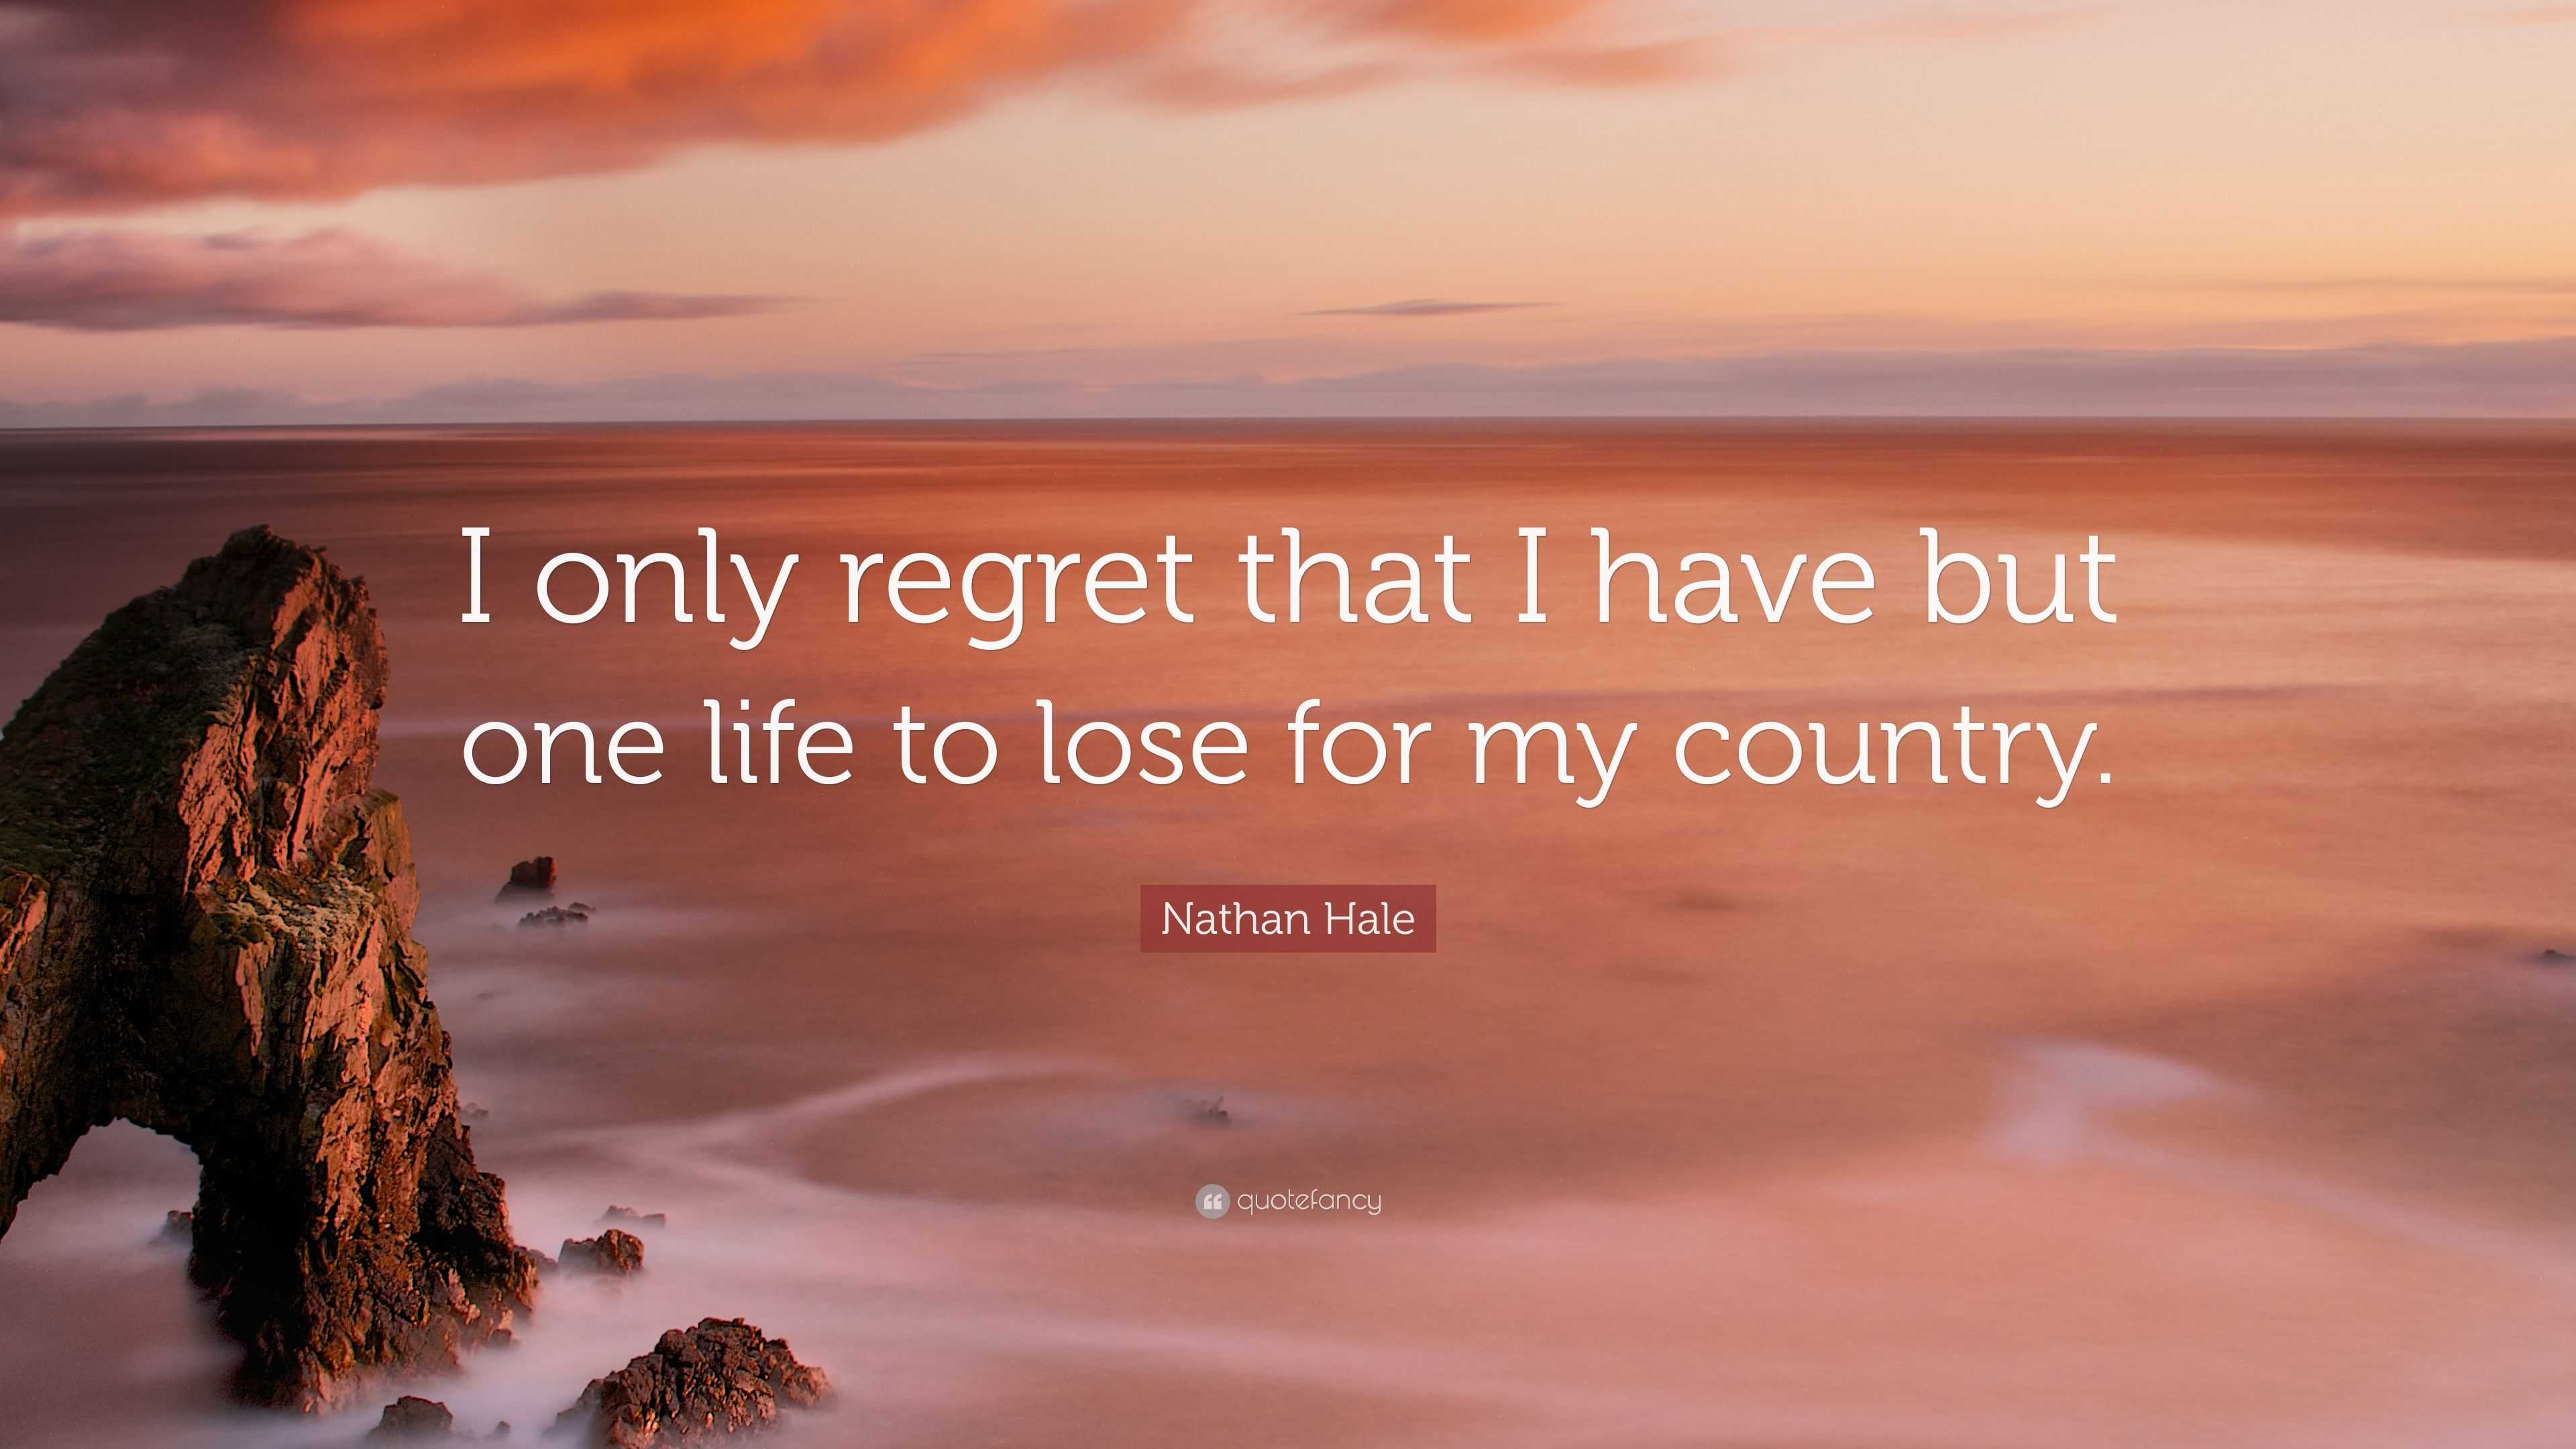 Nathan Hale Quote: “I only regret that I have but one life to lose for ...